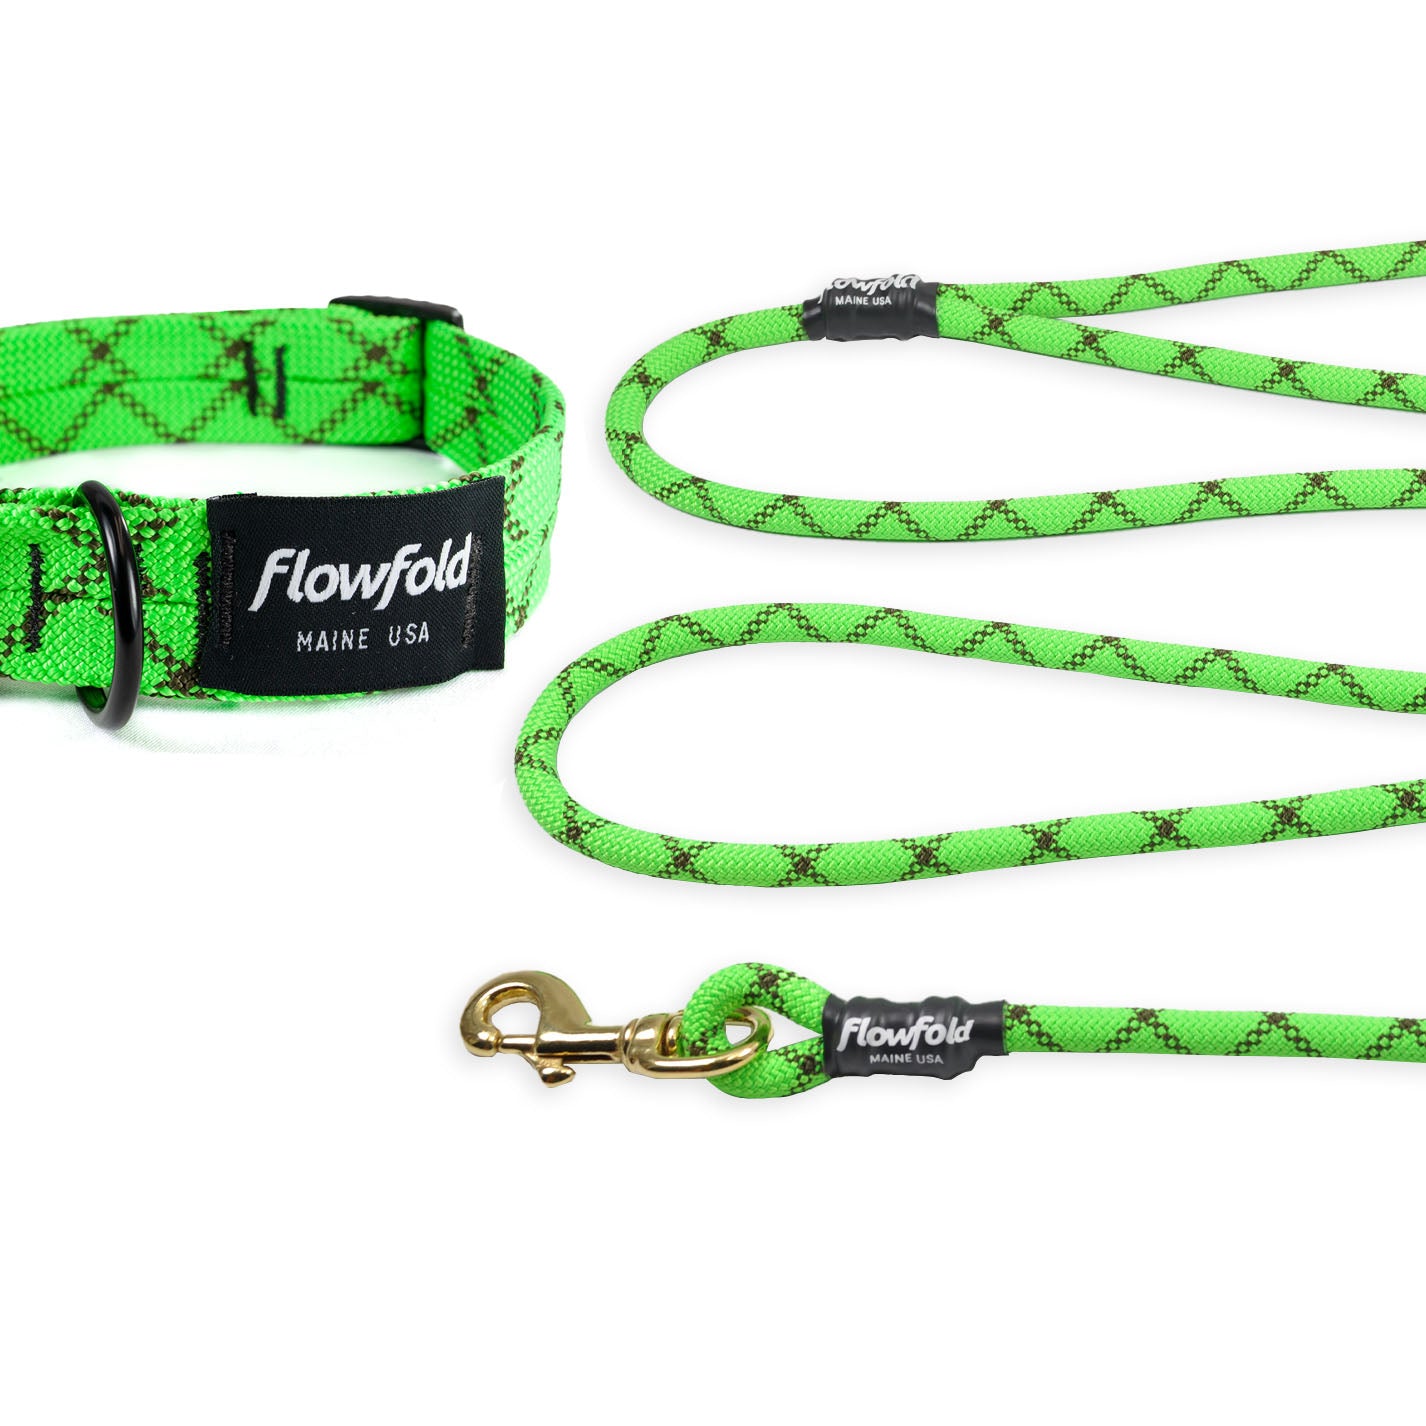 Flowfold - Recycled Climbing Rope 6ft Dog Leash - Green